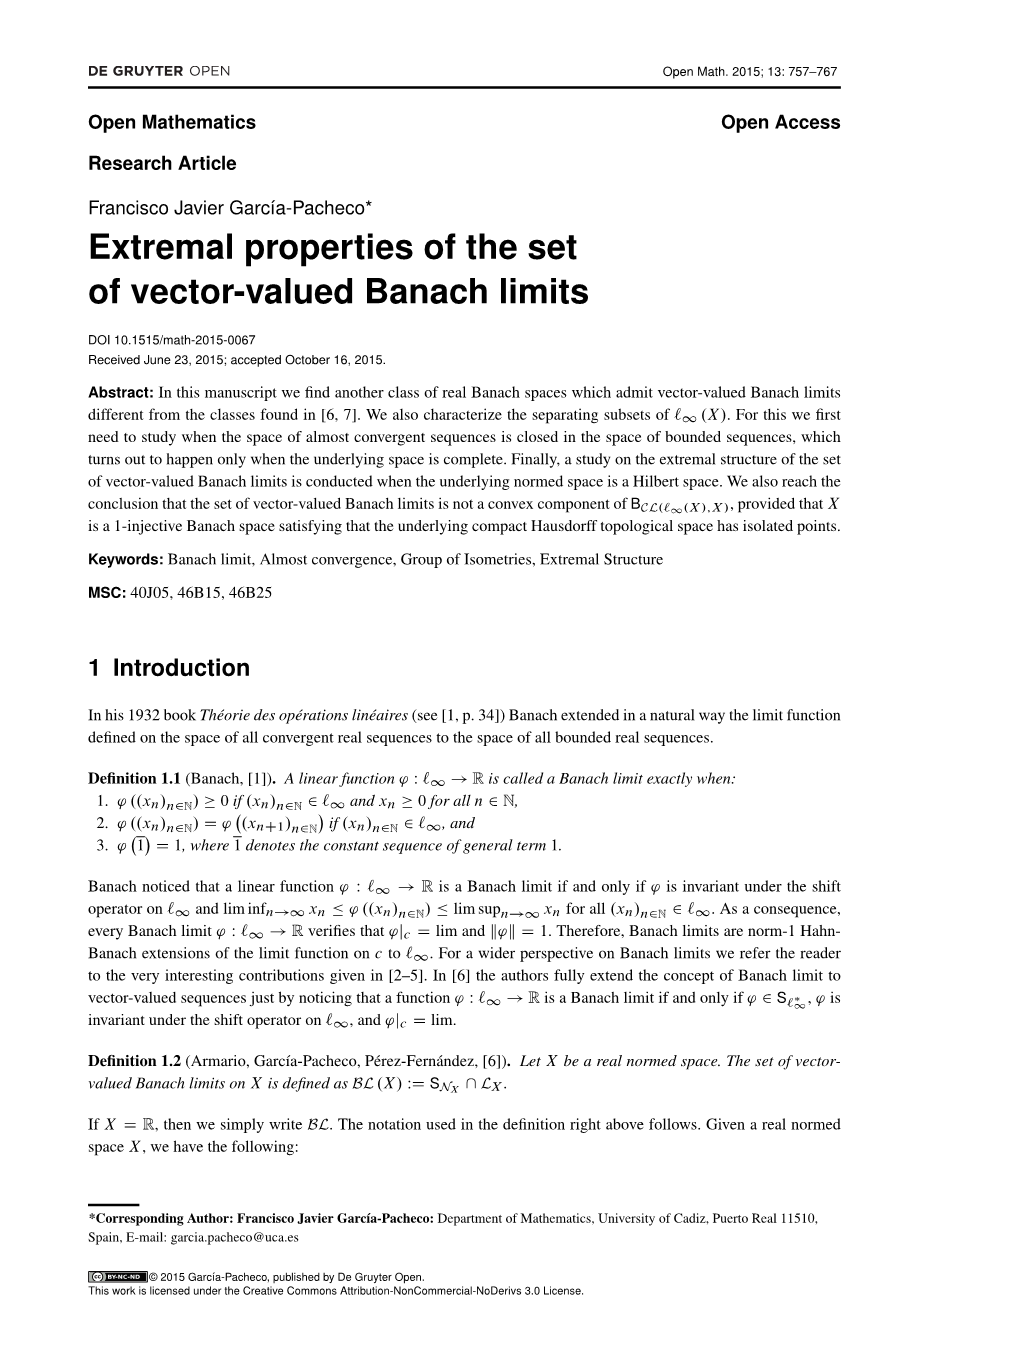 Extremal Properties of the Set of Vector-Valued Banach Limits